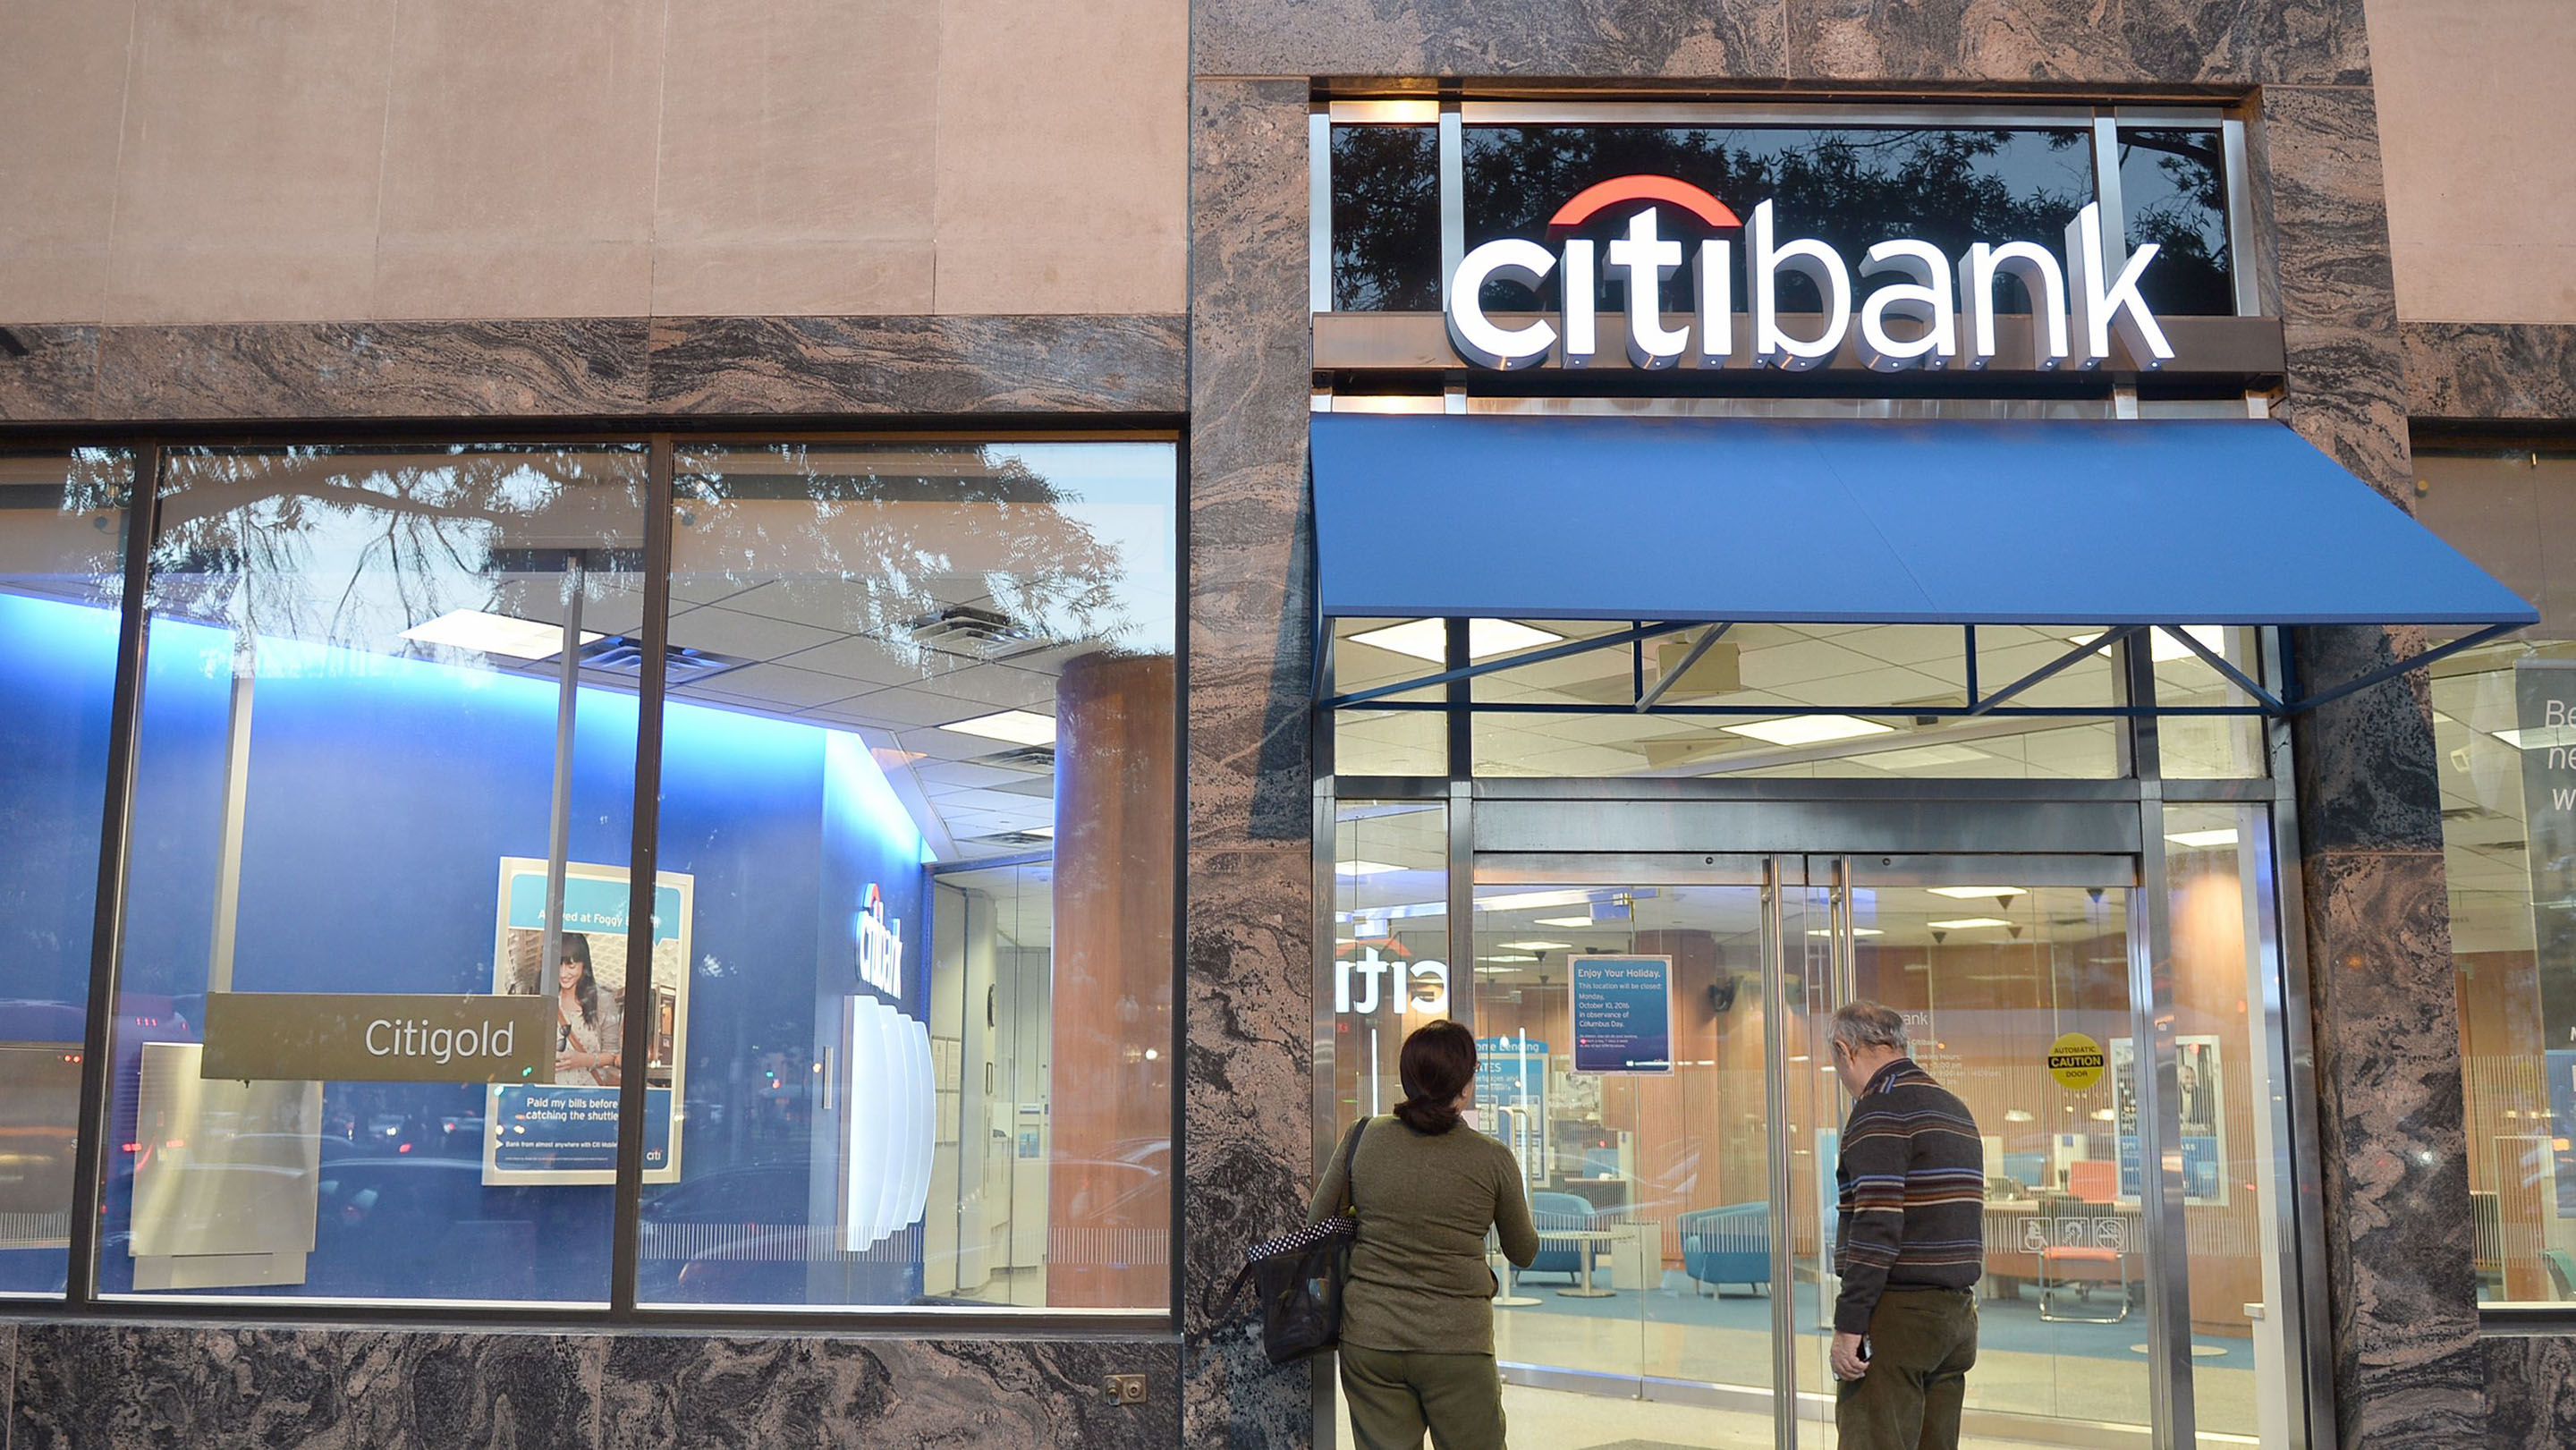 Why does Citi want to open more branches in the age of online banking?